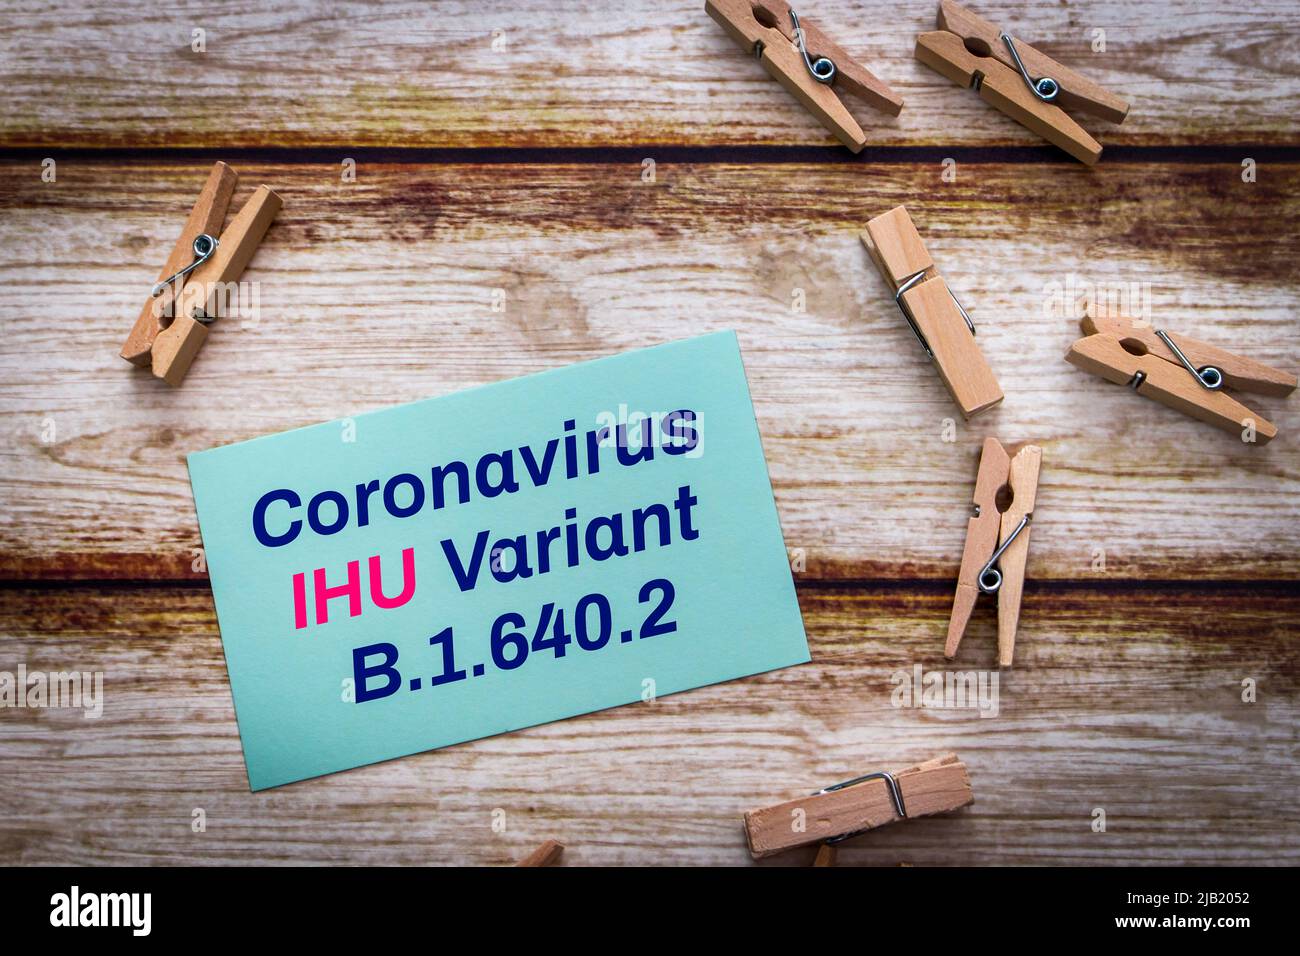 Message card showing Coronavirus IHU Variant B.1.640.2 with wooden pinch on shabby chic table. New COVID-19 variant detected in southern France Stock Photo